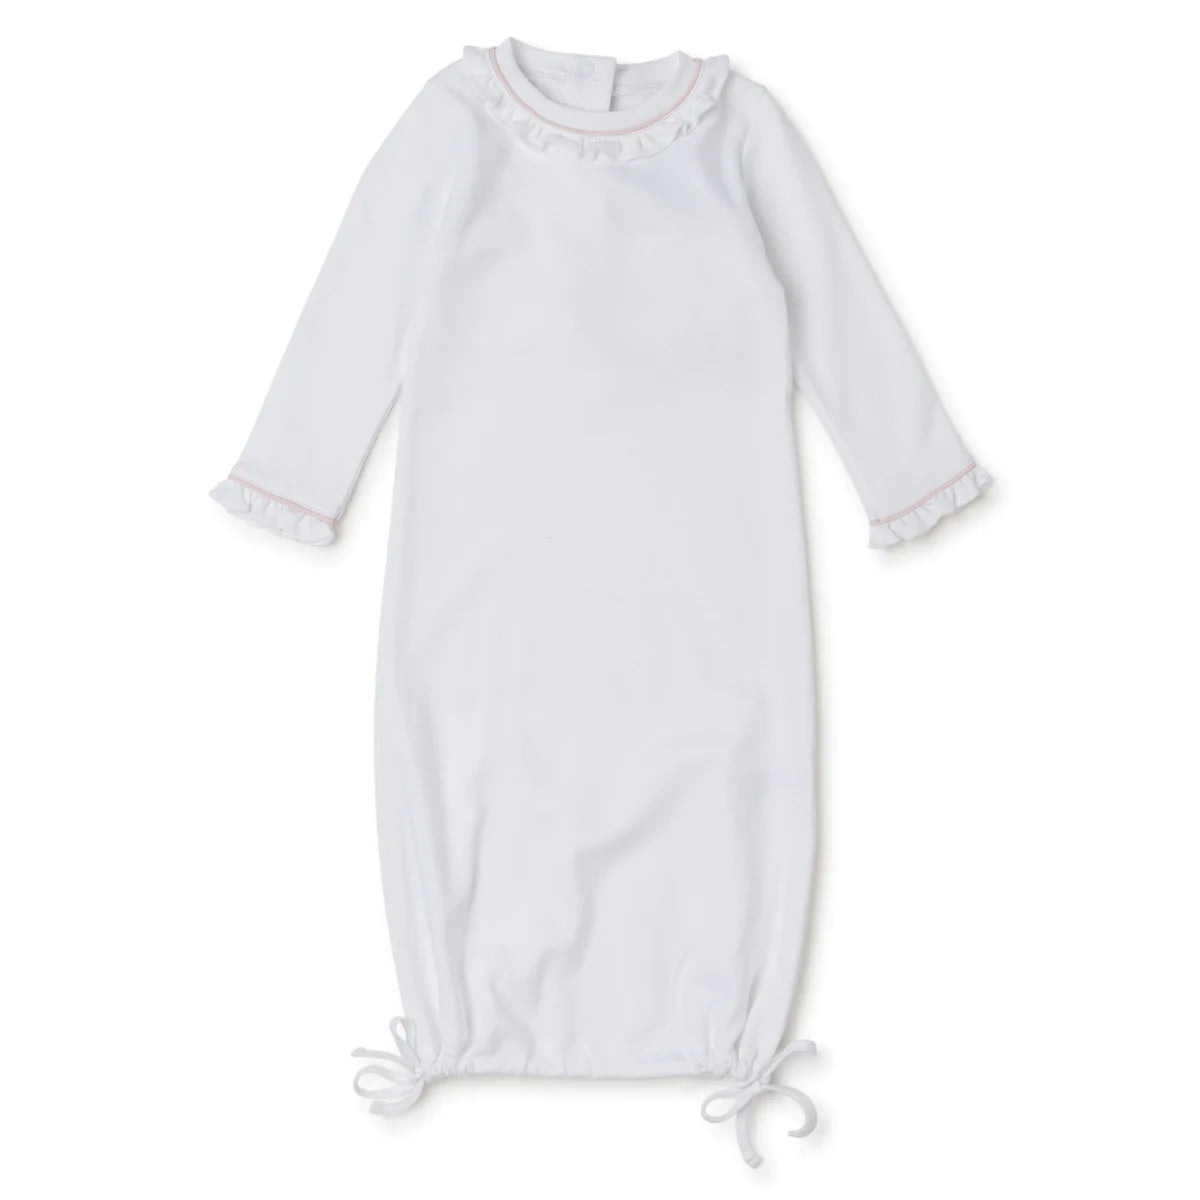 GEORGIA PIMA COTTON DAYGOWN FOR GIRLS - WHITE WITH LIGHT PINK PIPING